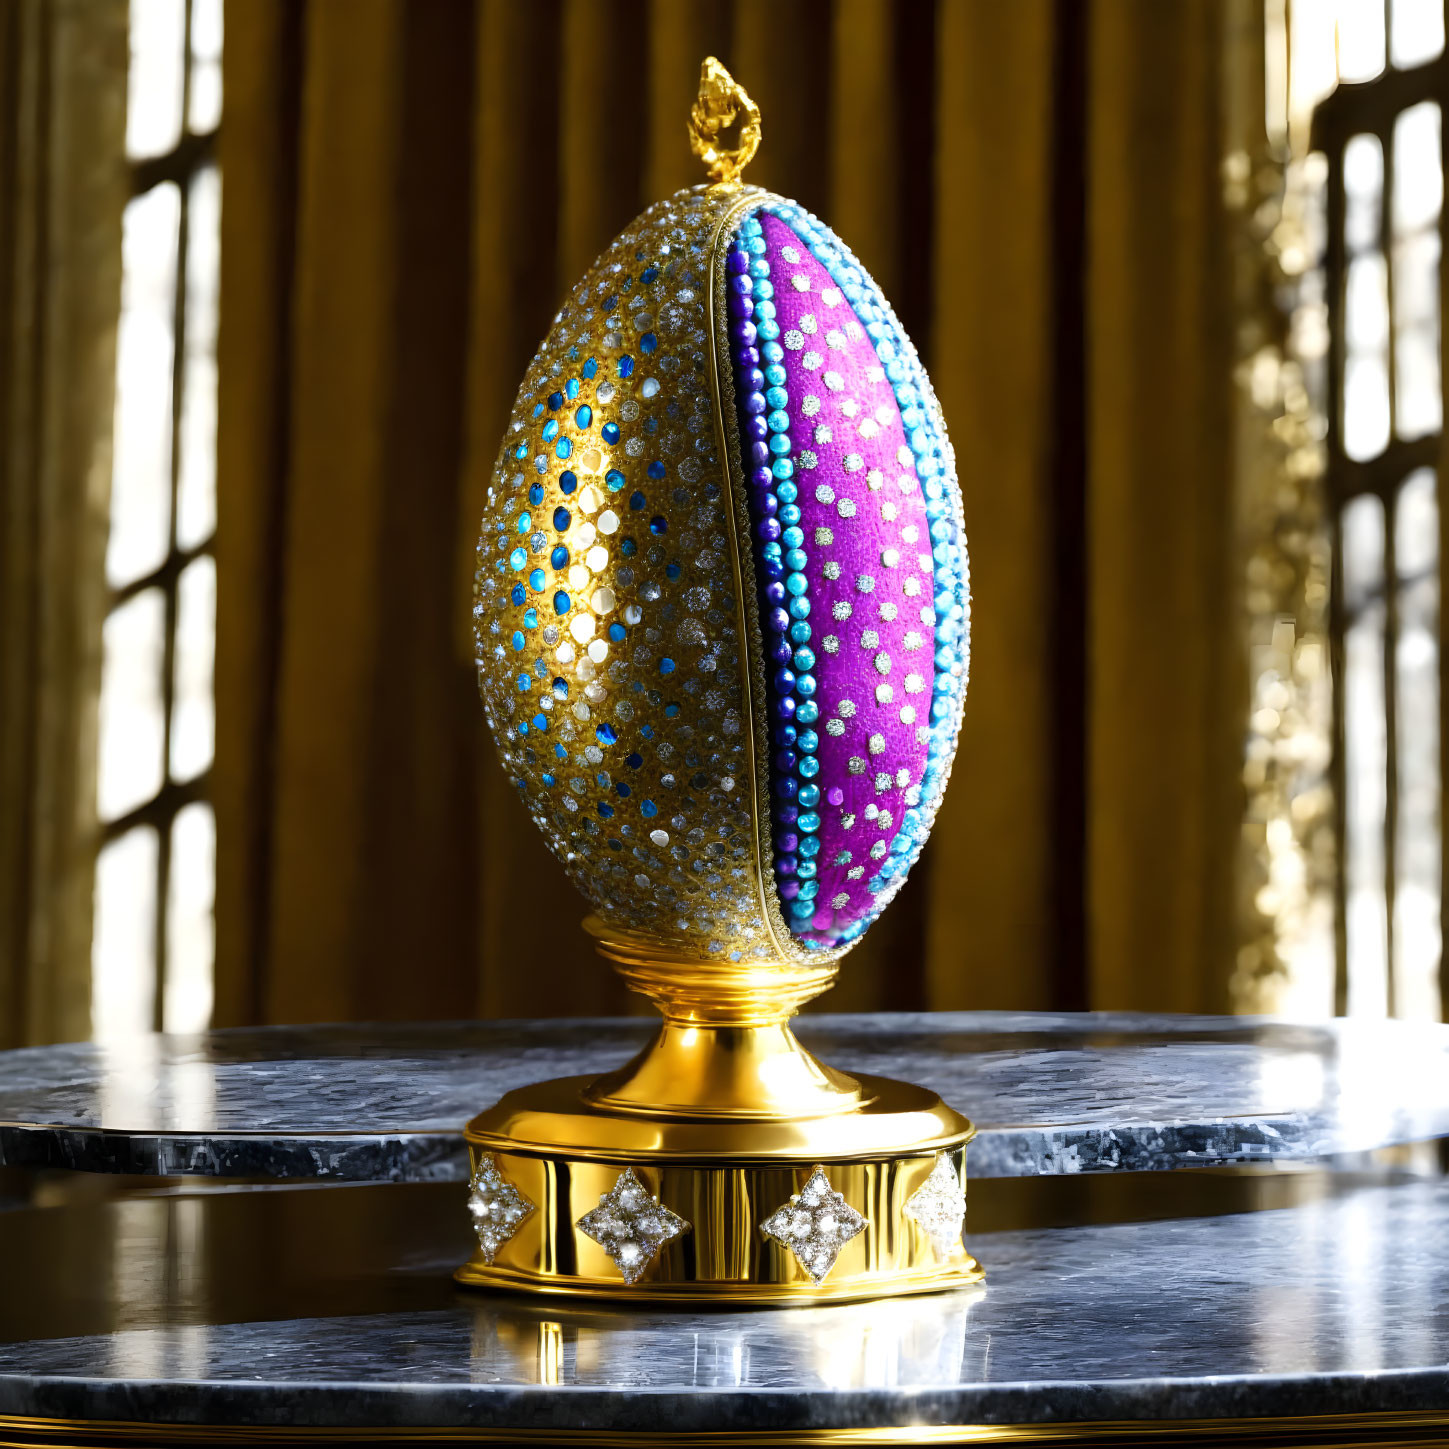 Ornate jeweled egg with blue and purple gemstone inlays on golden pedestal